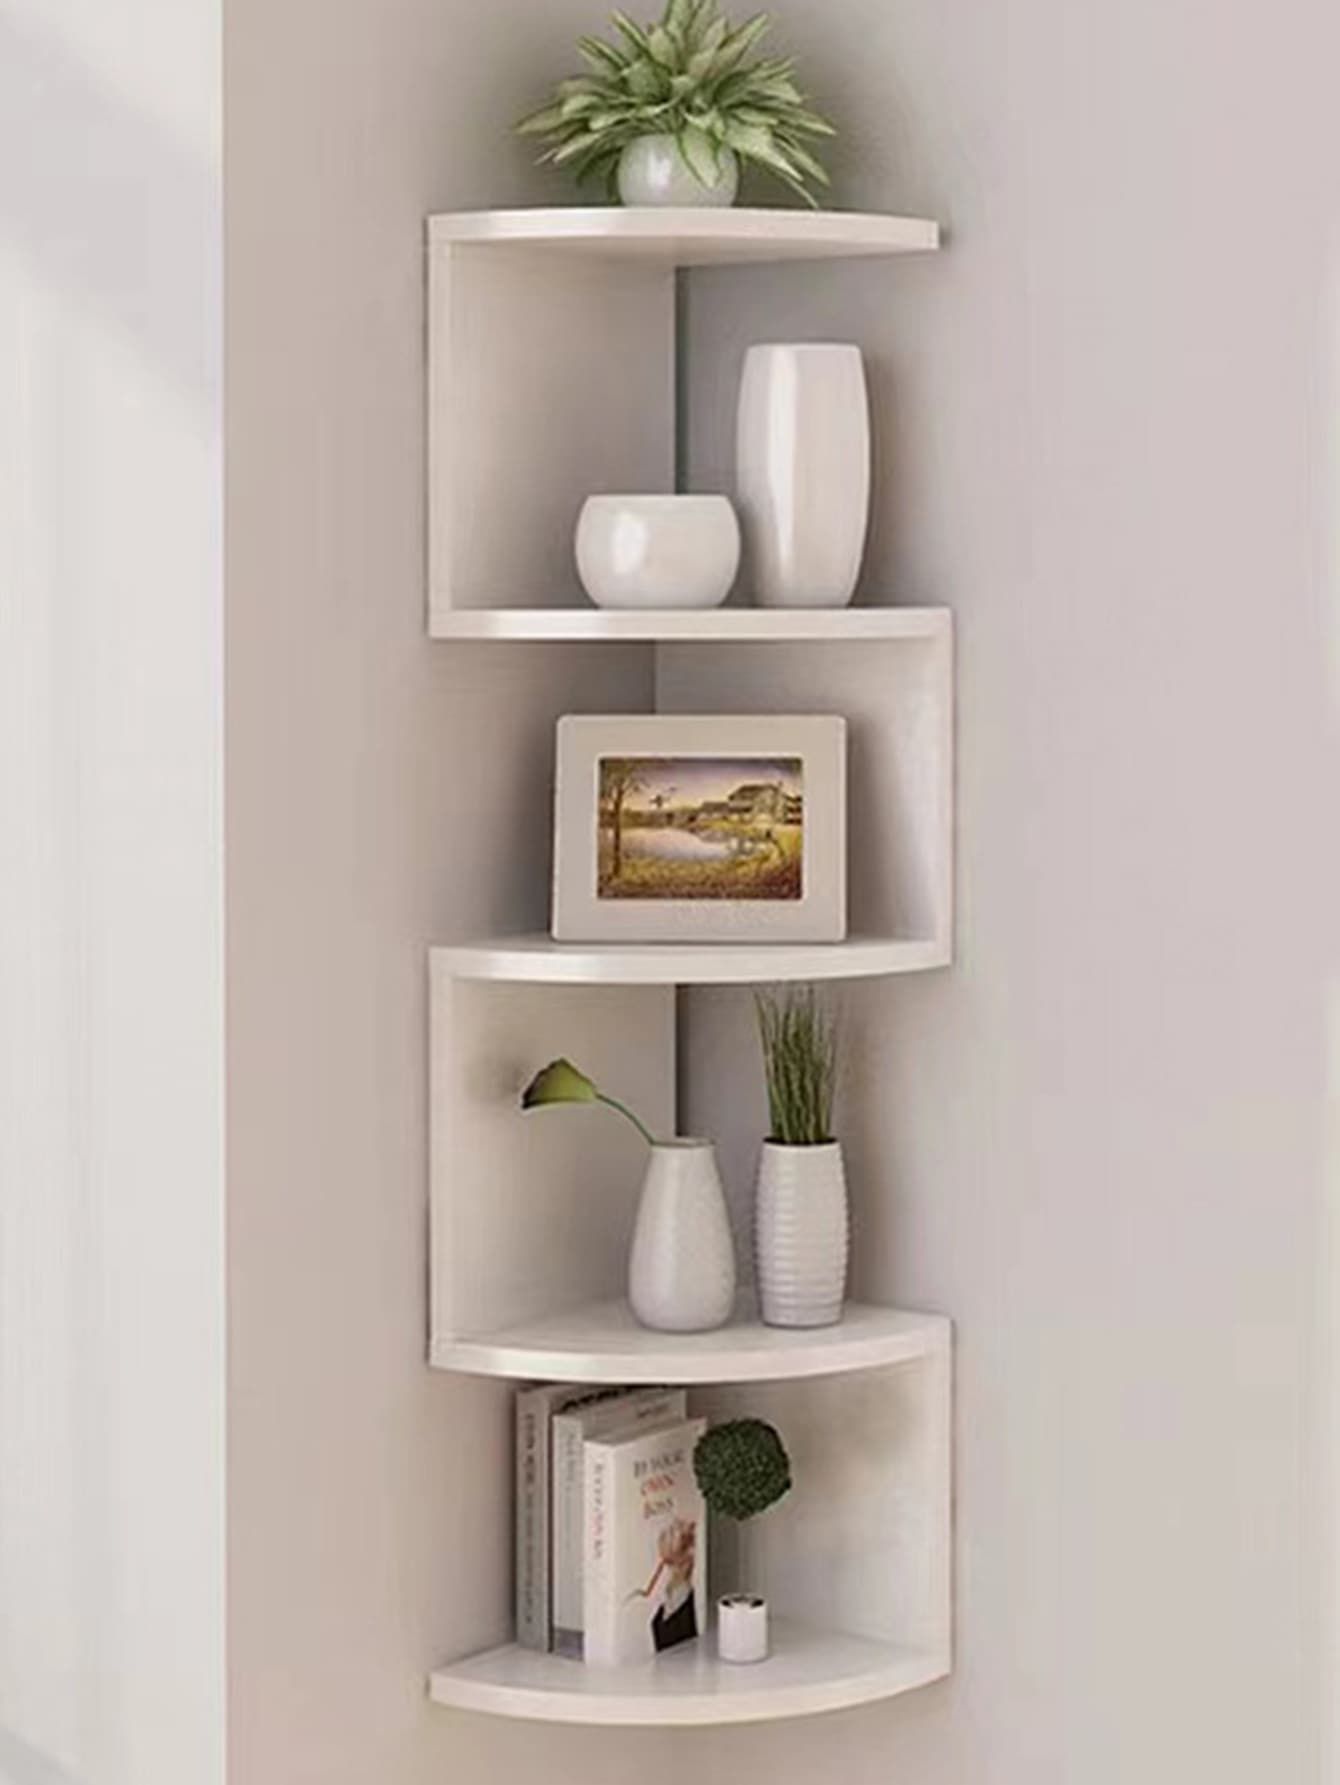 Creative Ways to Organize Your Bedroom Walls with Storage Shelves